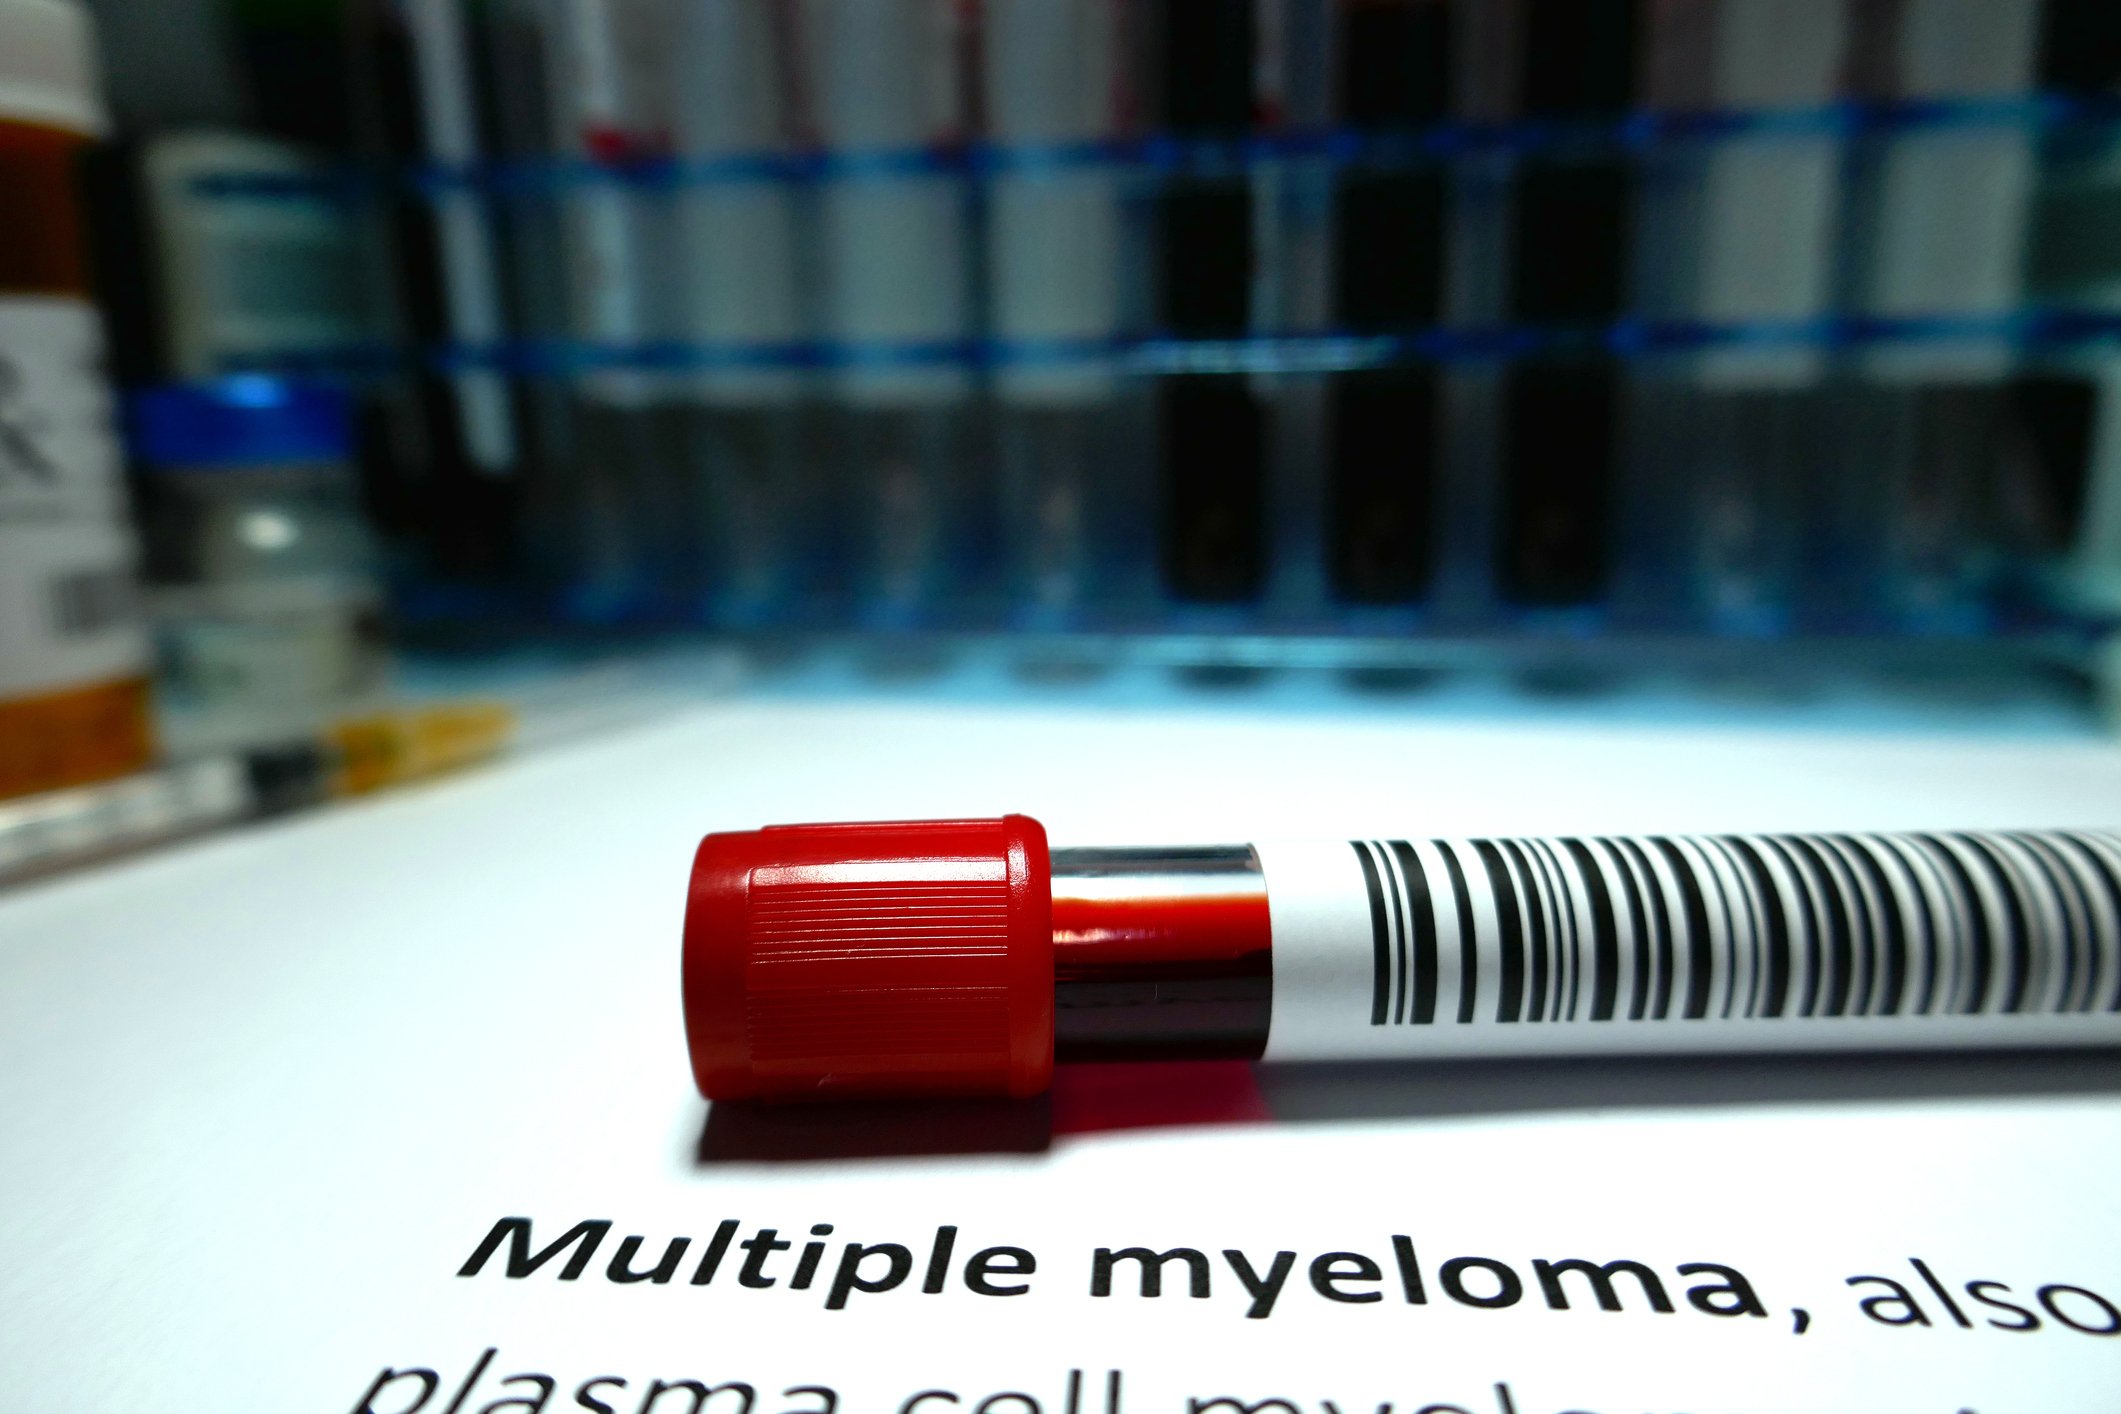 Australian biotech's myeloma antibody partners with Revlimid to boost response rates